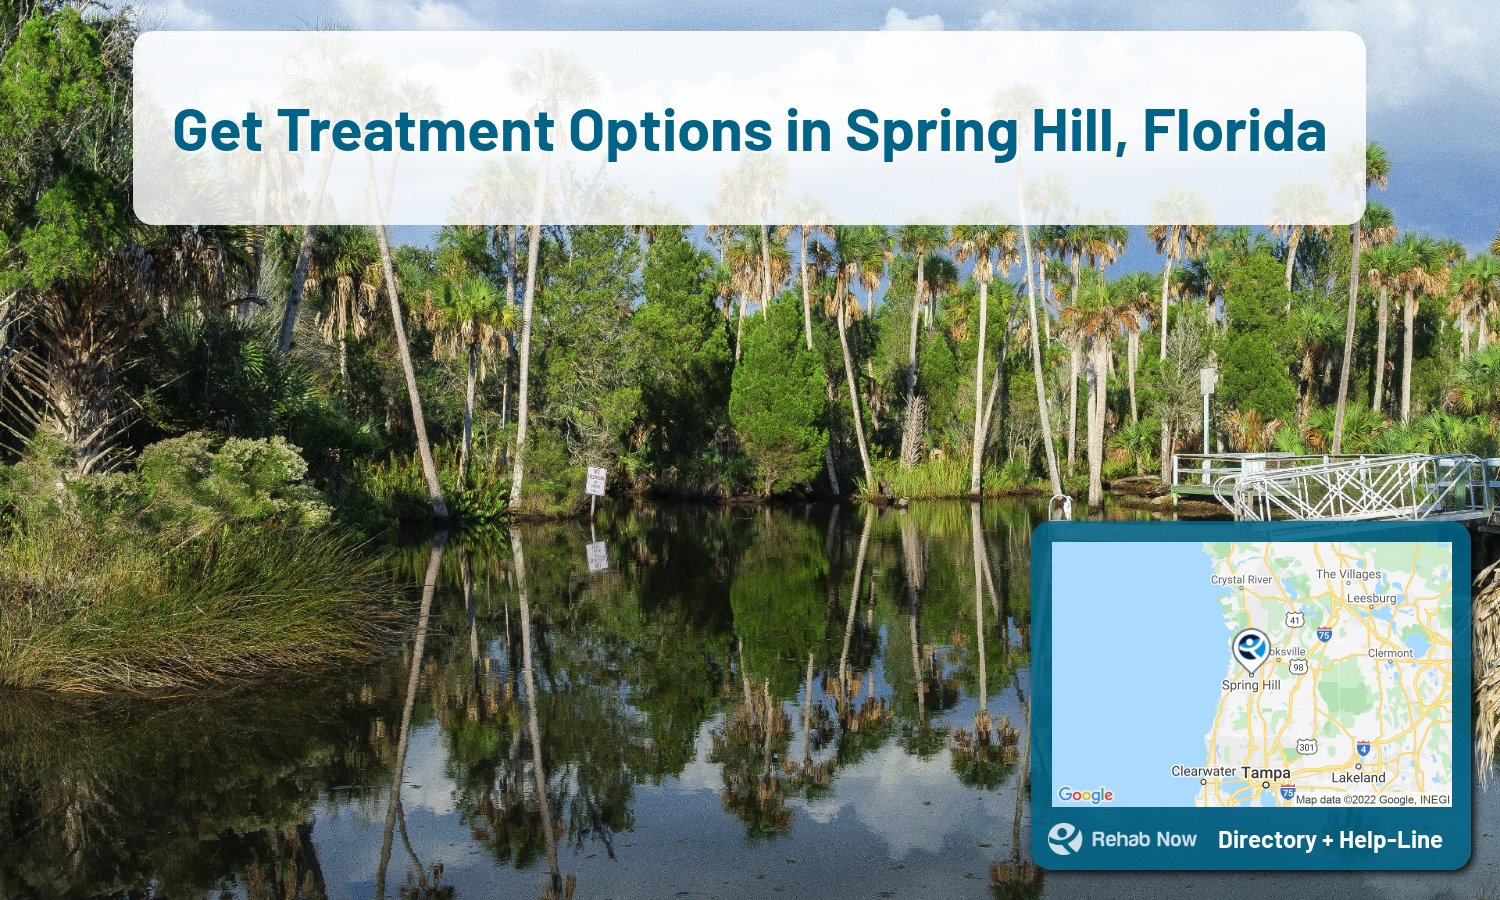 Find drug rehab and alcohol treatment services in Spring Hill. Our experts help you find a center in Spring Hill, Florida